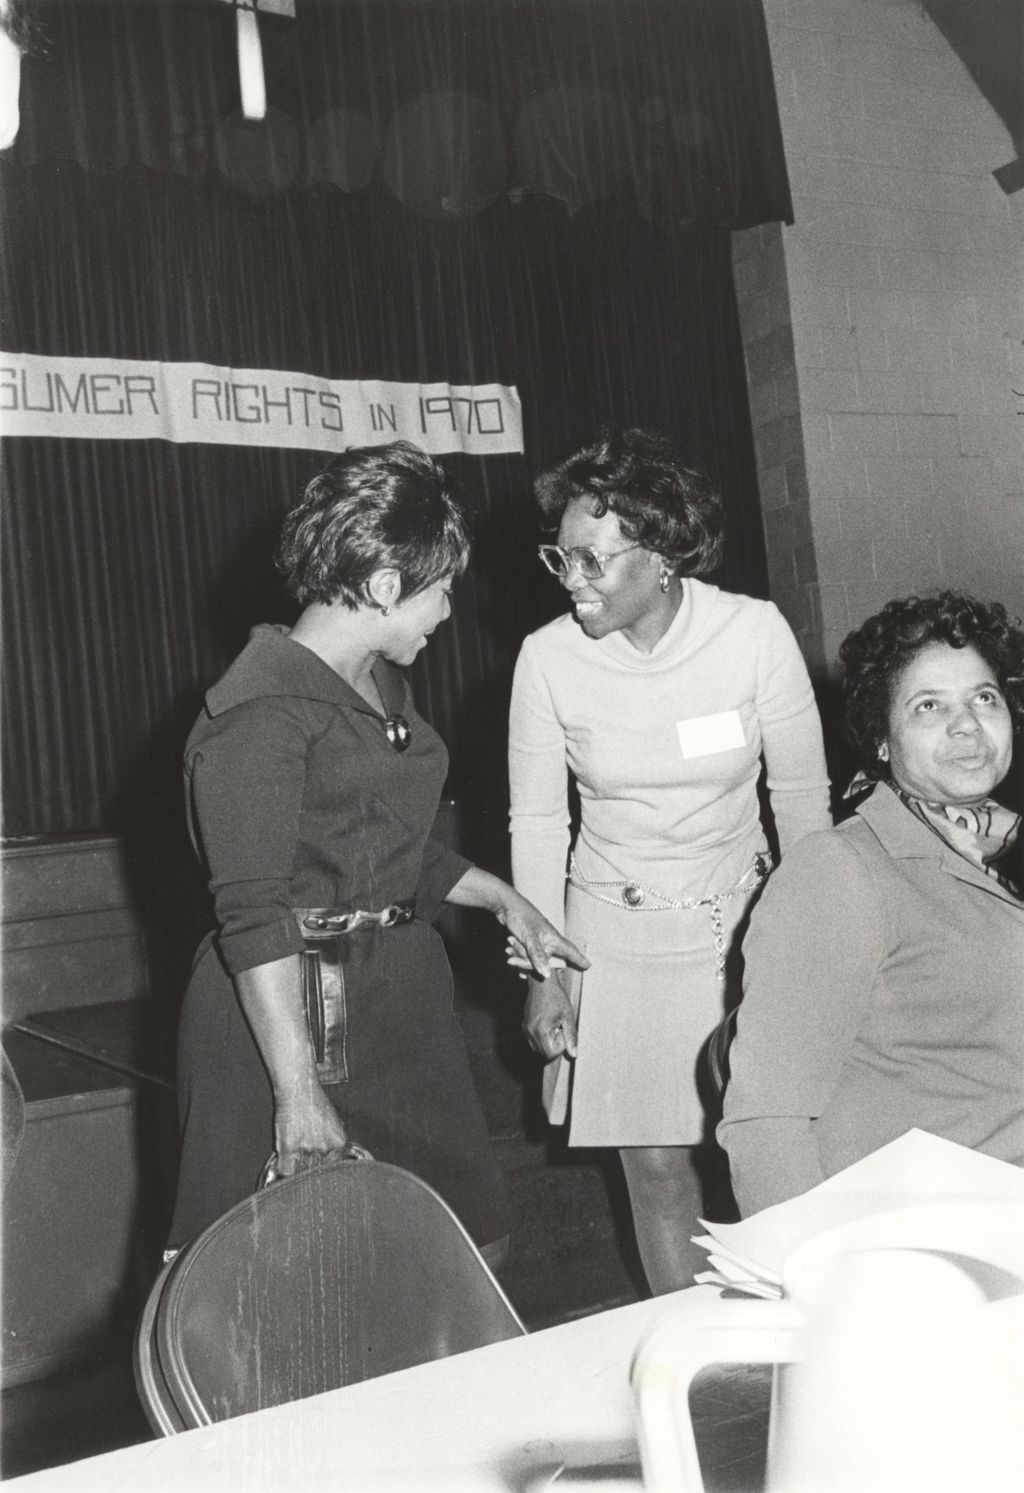 Women at Consumer Rights in 1970 event